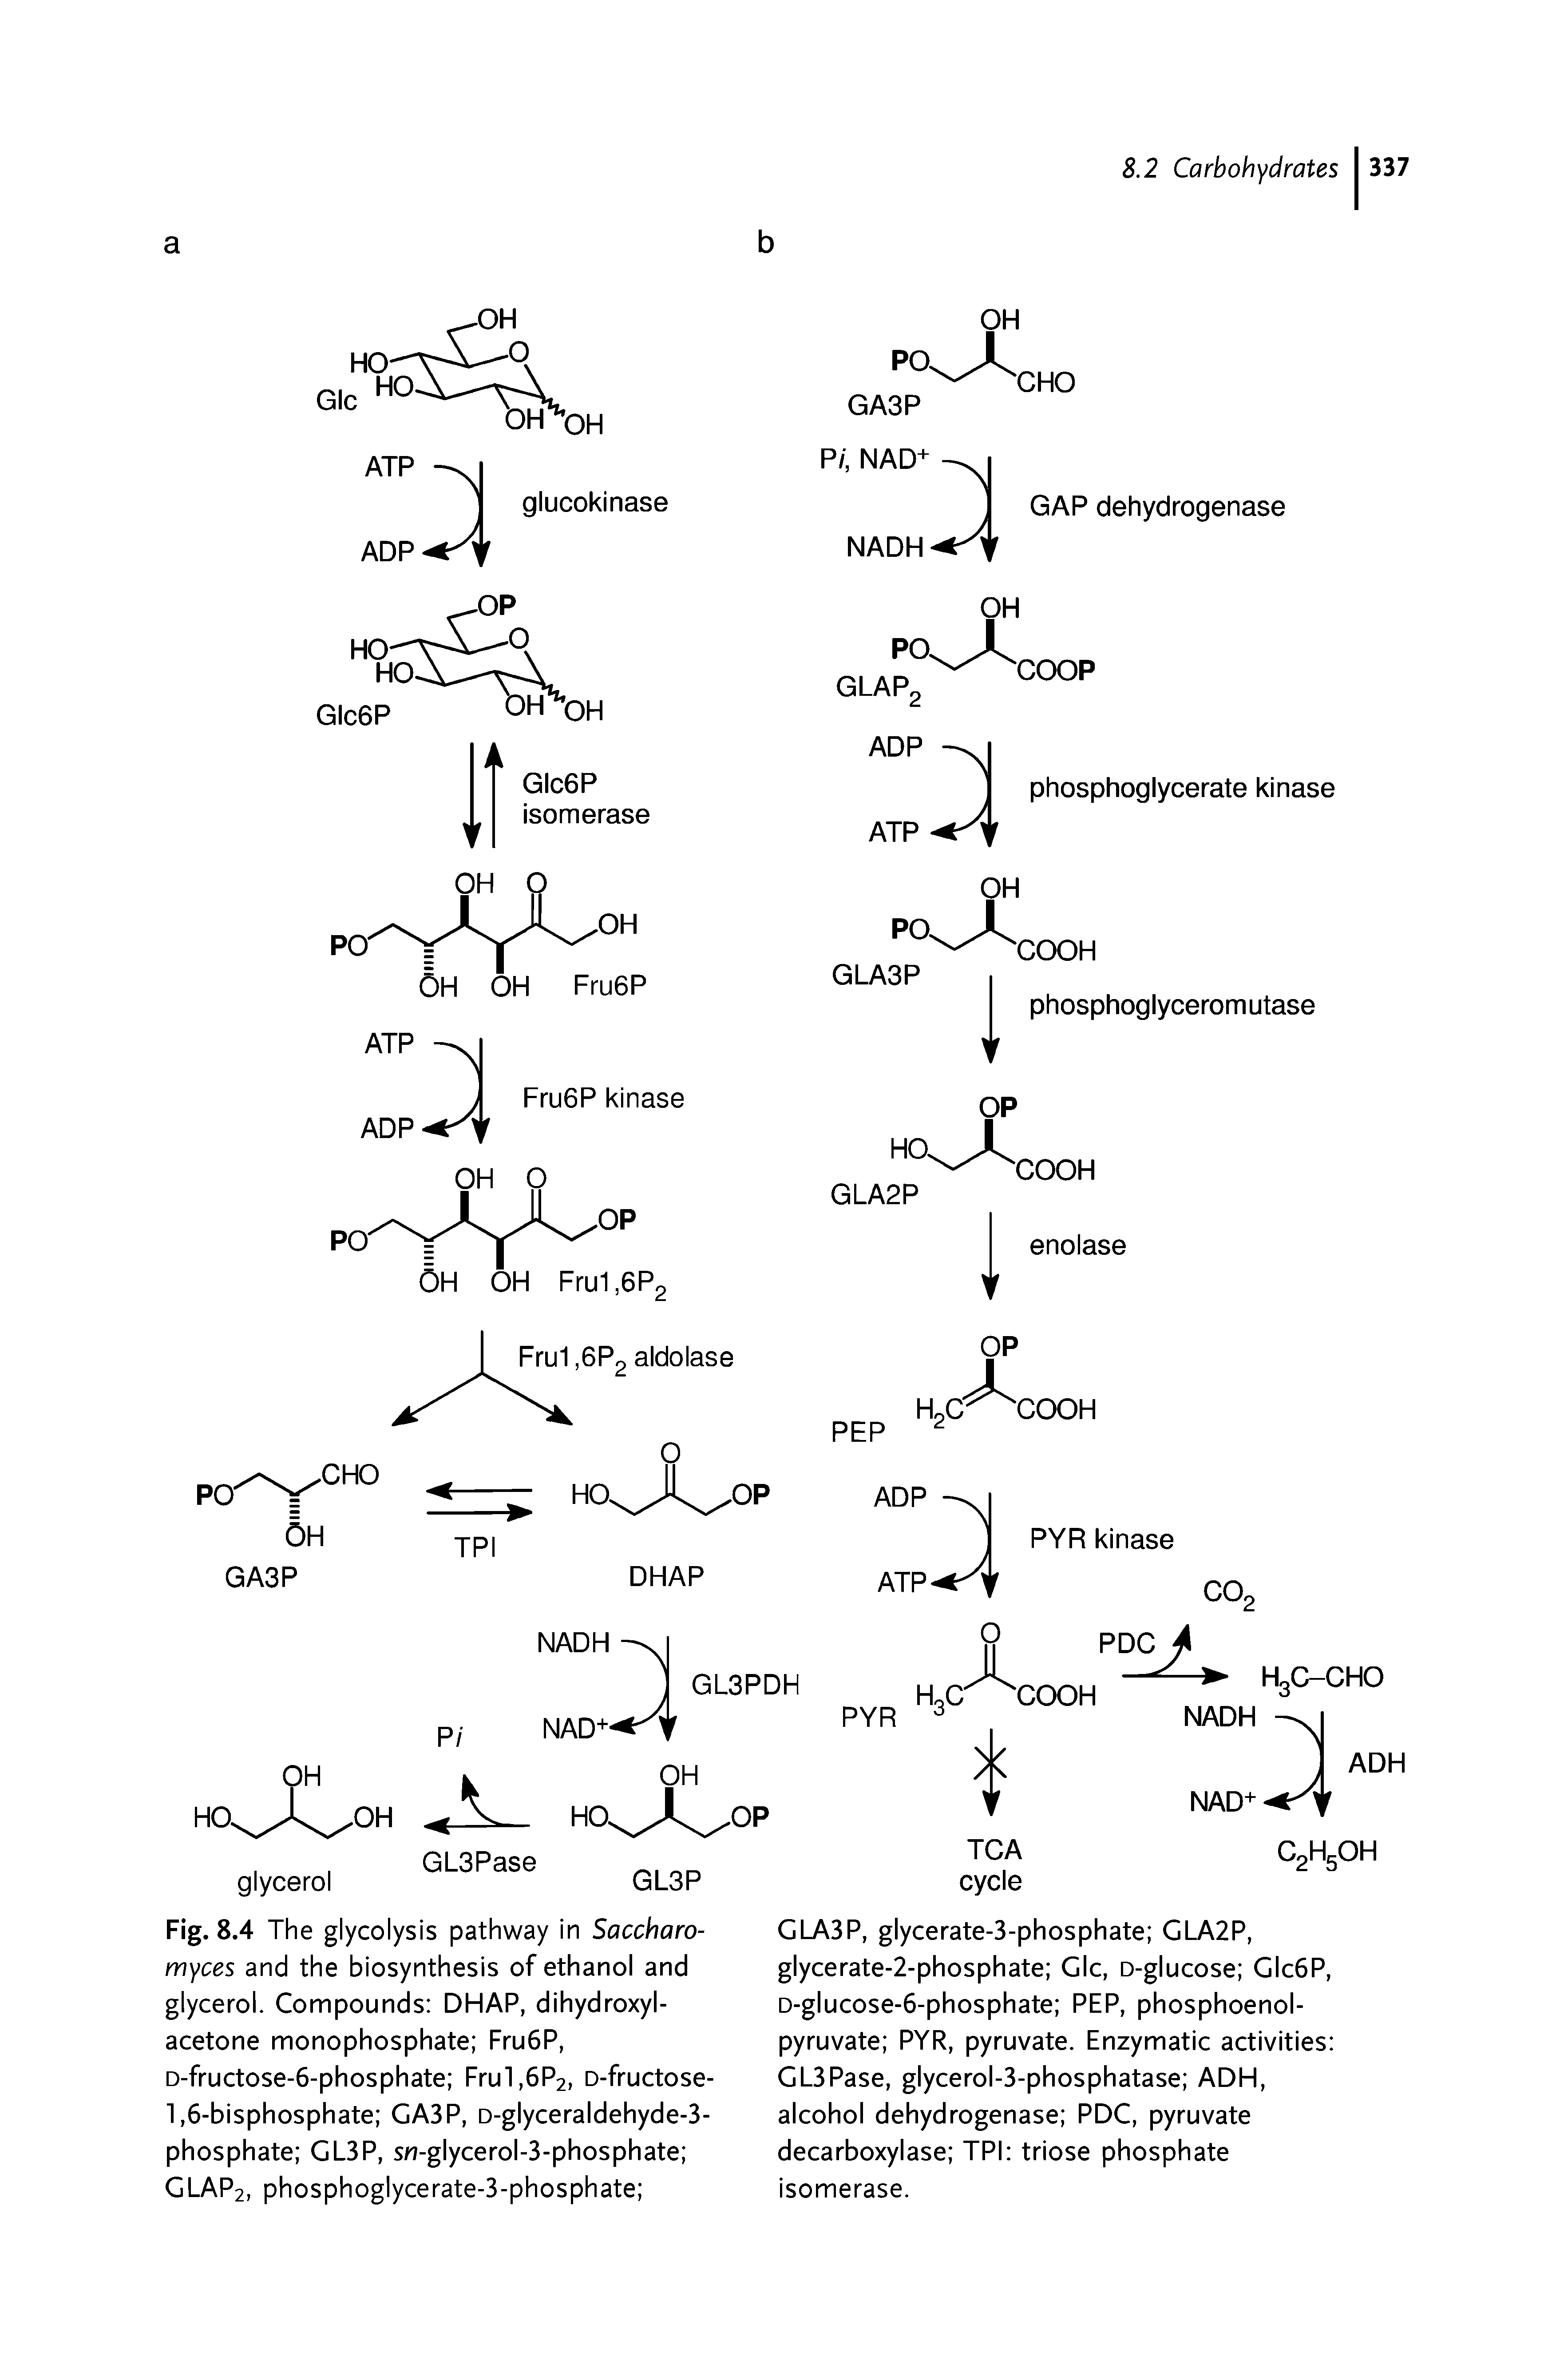 Fig. 8.4 The glycolysis pathway in Saccharo-myces and the biosynthesis of ethanol and glycerol. Compounds DHAP, dihydroxyl-acetone monophosphate Fru6P, D-fructose-6-phosphate Frul,6P2, D-fructose-1,6-bisphosphate GA3P, D-glyceraldehyde-3-phosphate GL3P, sn-glycerol-3-phosphate GLAP2, phosphoglycerate-3-phosphate ...